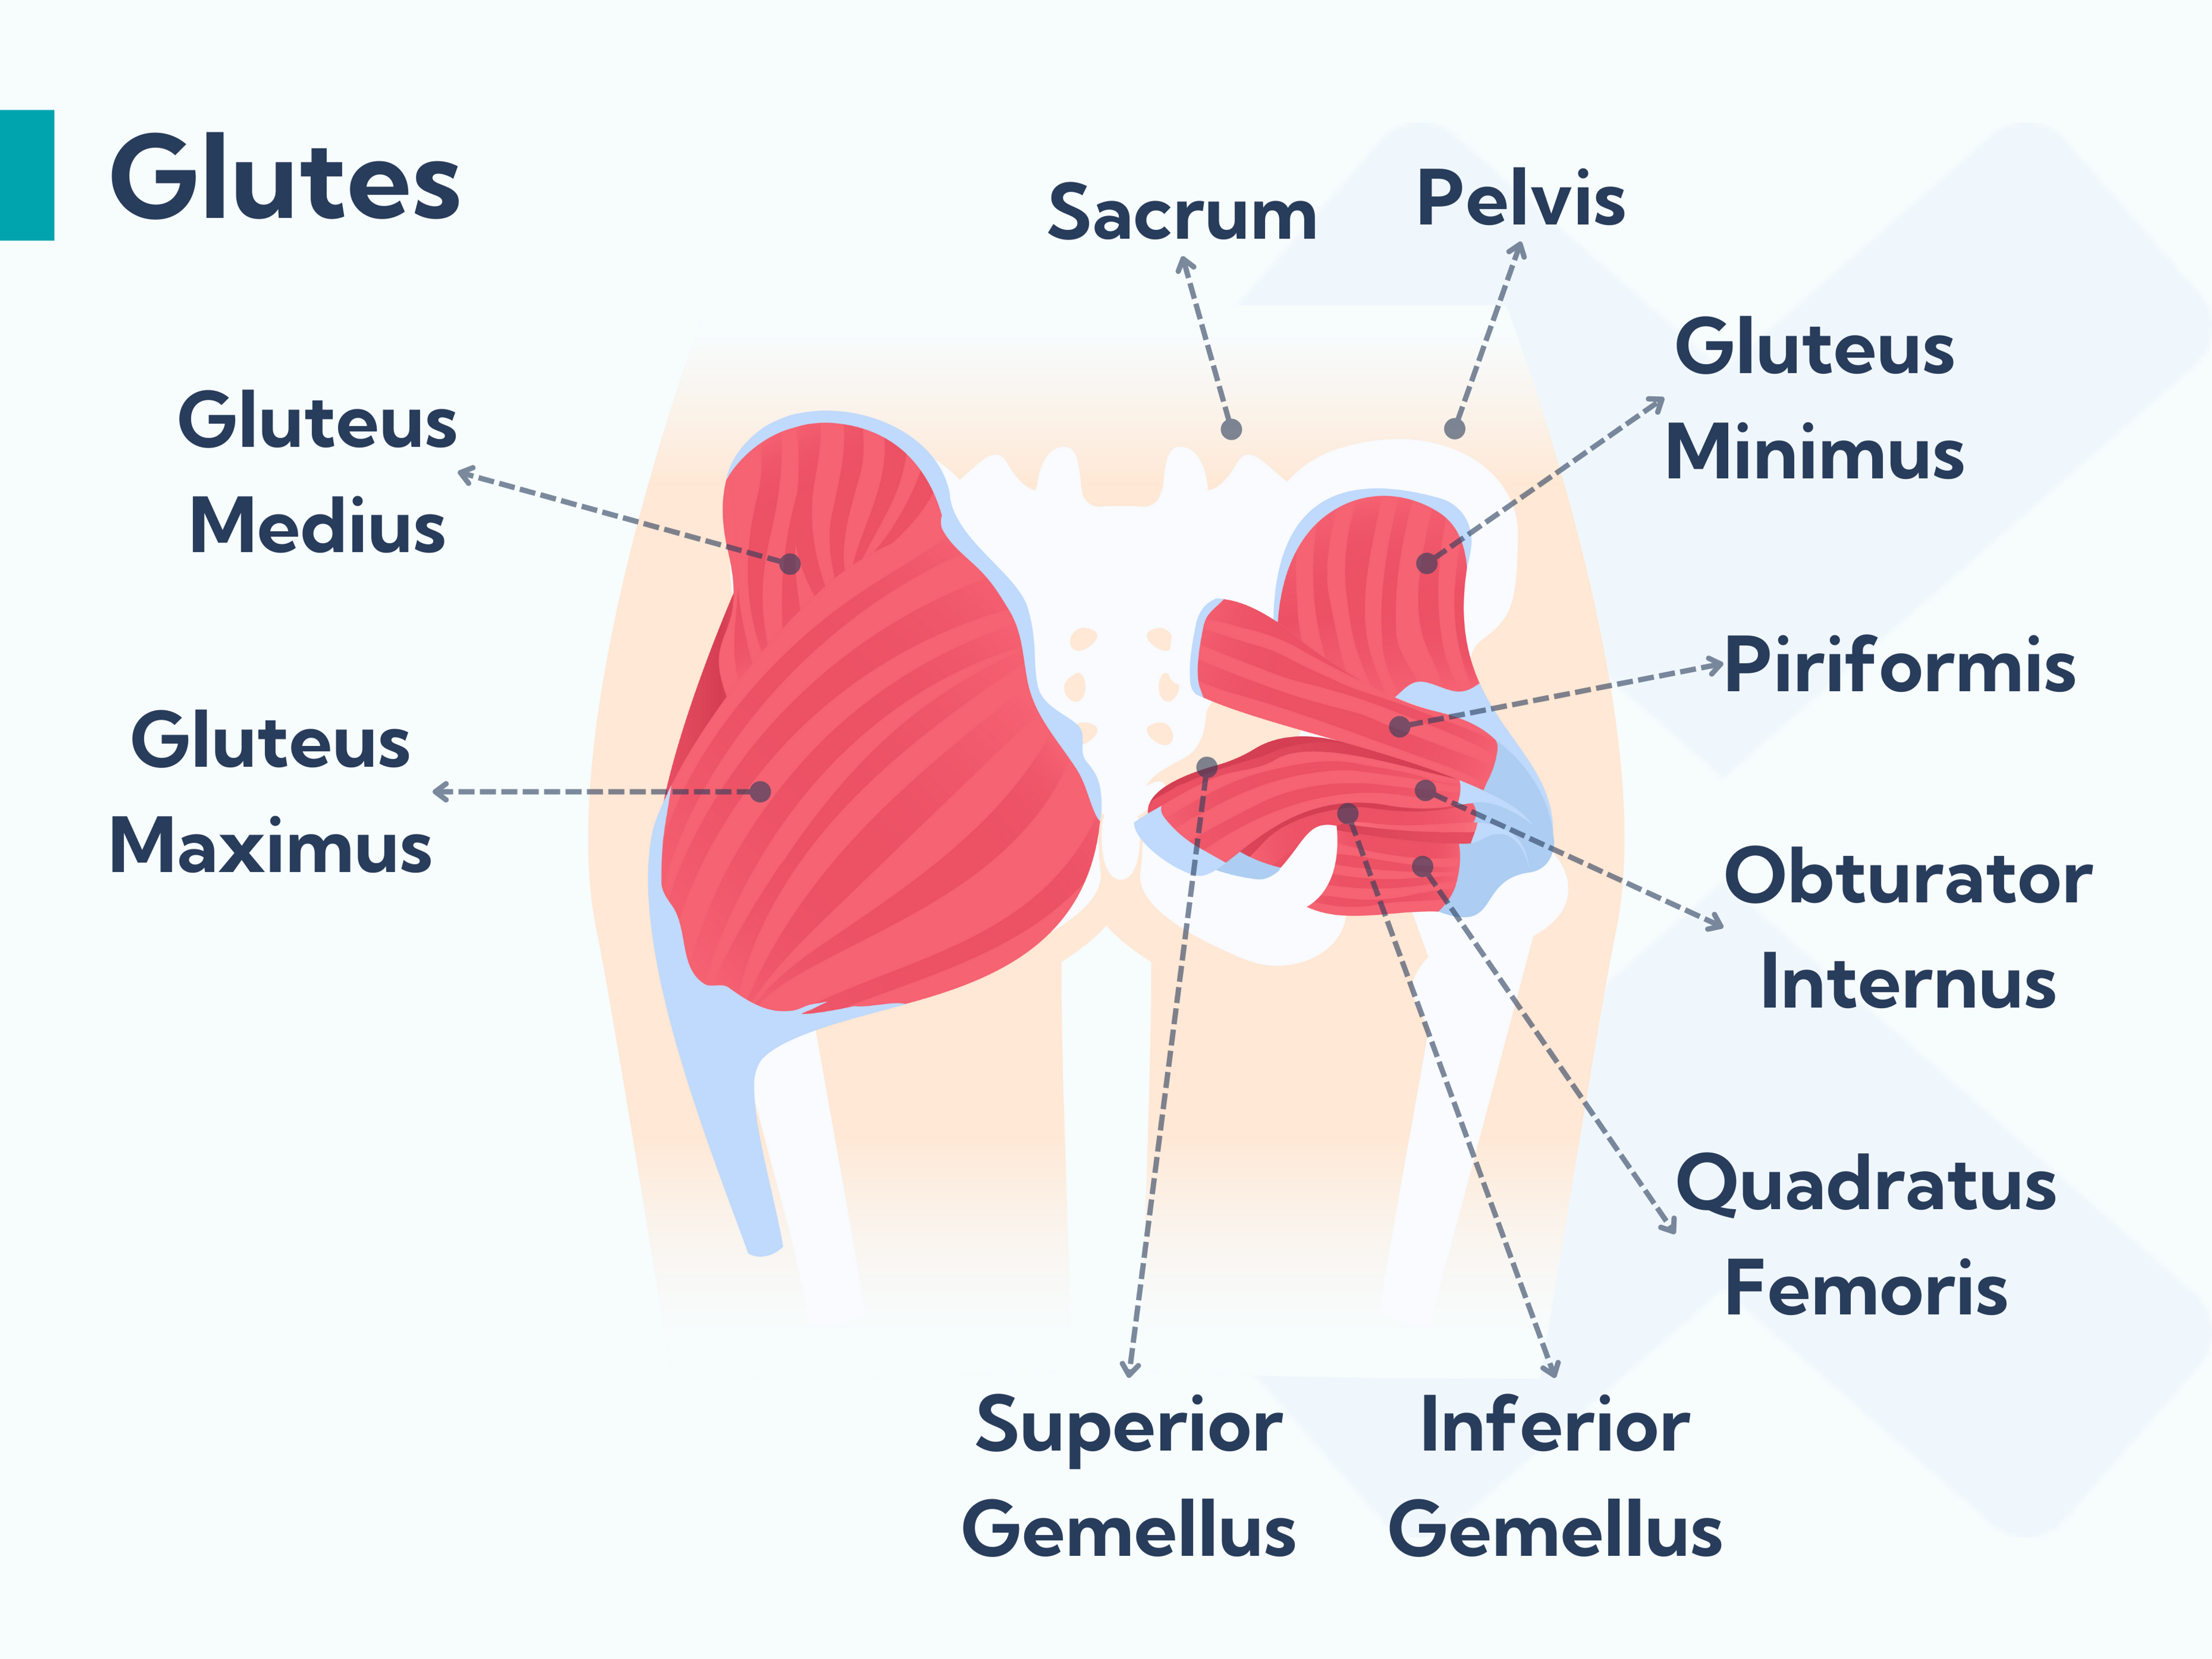 The glute medius and minimus tendons are the most commonly affected tendons in gluteal tendinopathy.